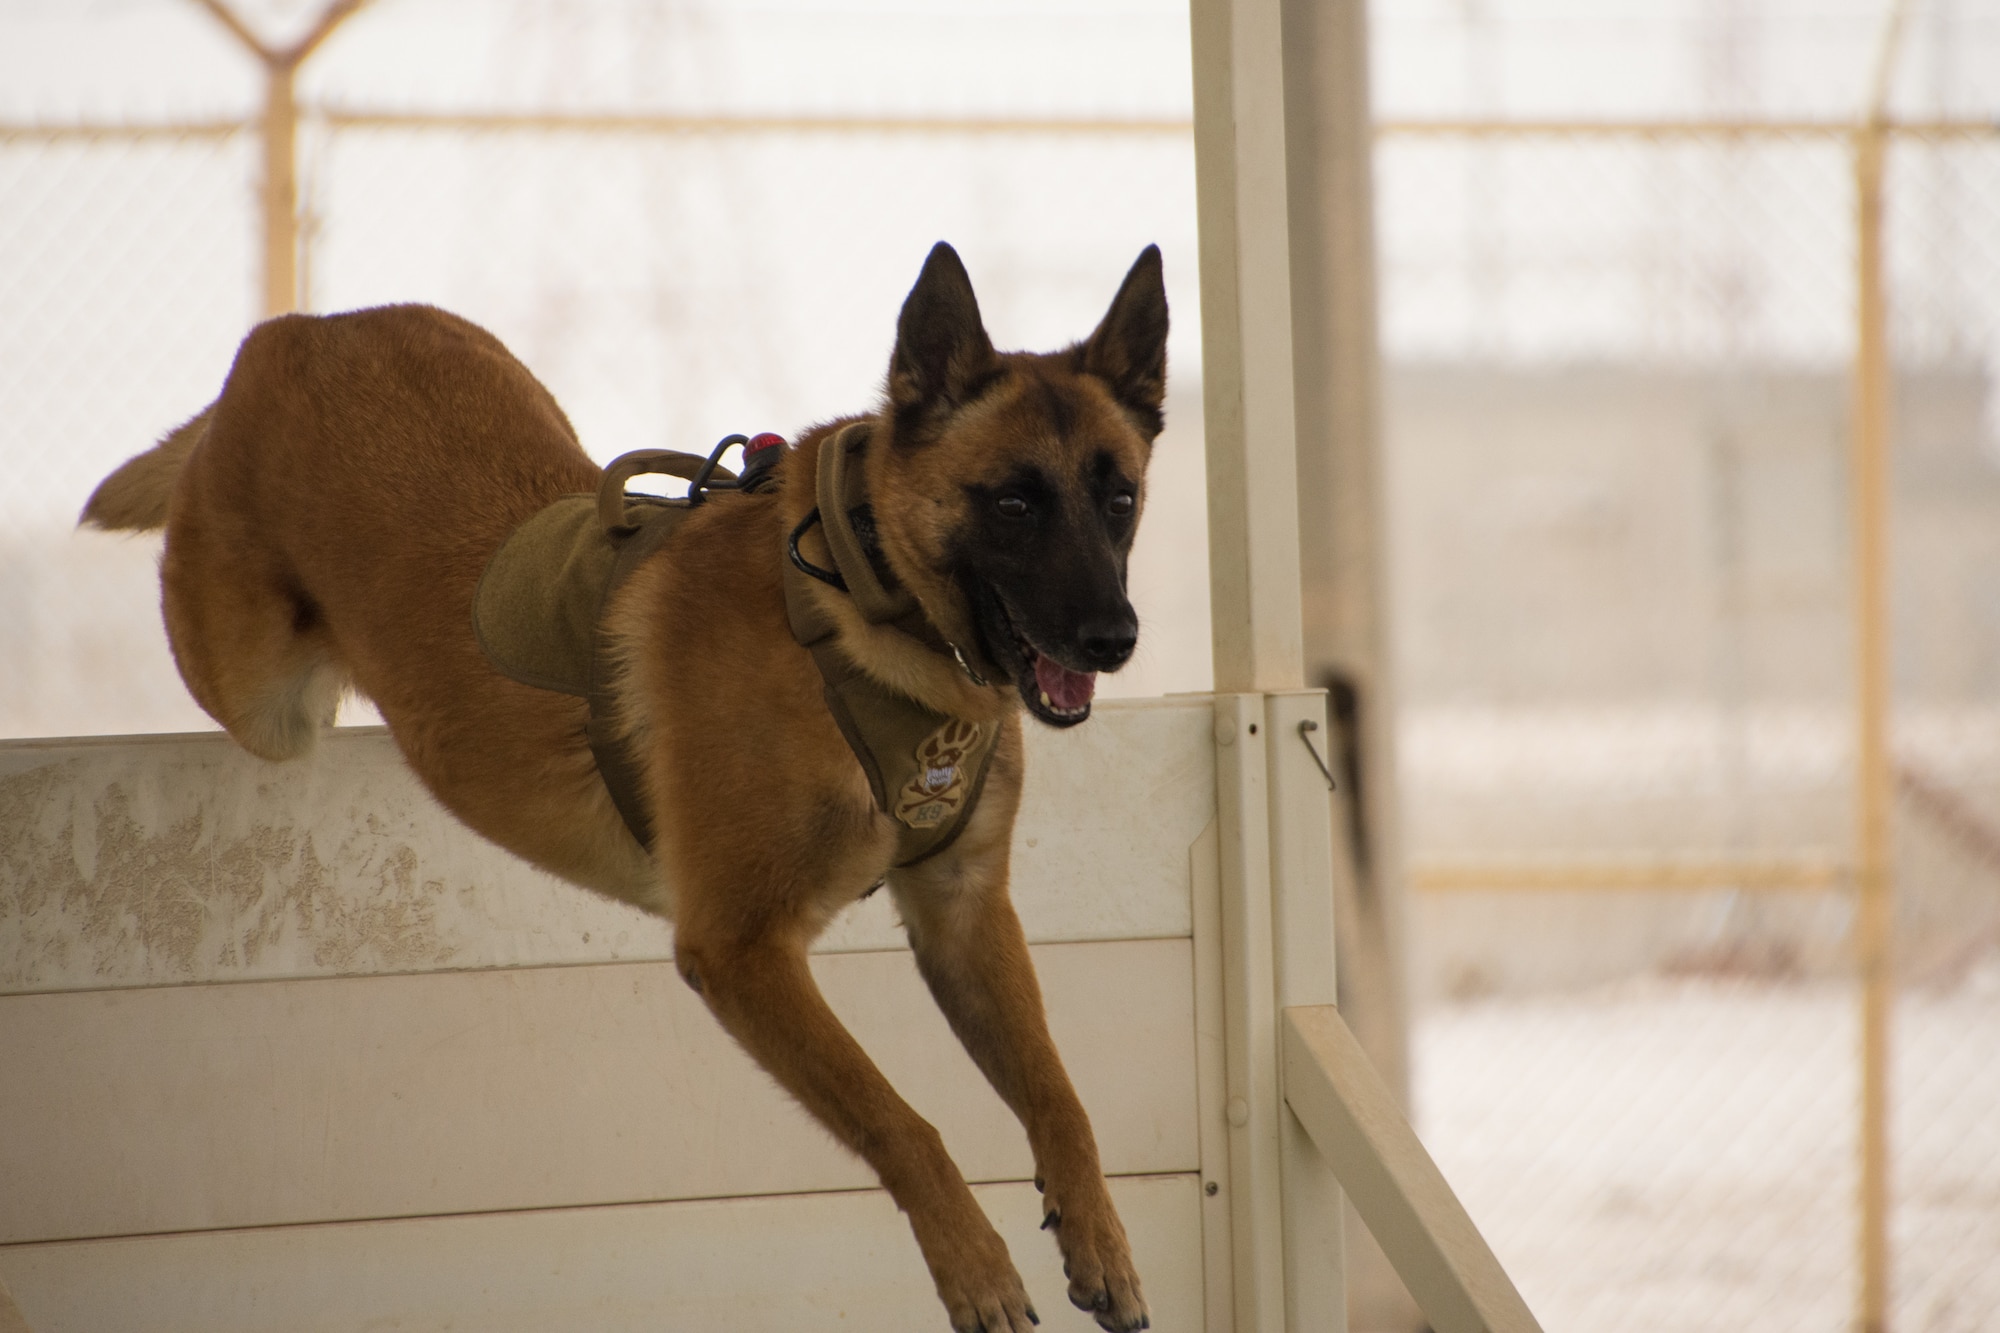 Members of the 379th Expeditionary Security Forces Squadron participate in a K-9 competition during National Police Week at Al Udeid Air Base, Qatar, May 14, 2018. Throughout the week, security forces members held numerous events in honor of defenders who died in the line of duty. (U.S. Air Force photo by Tech. Sgt. Ted Nichols)